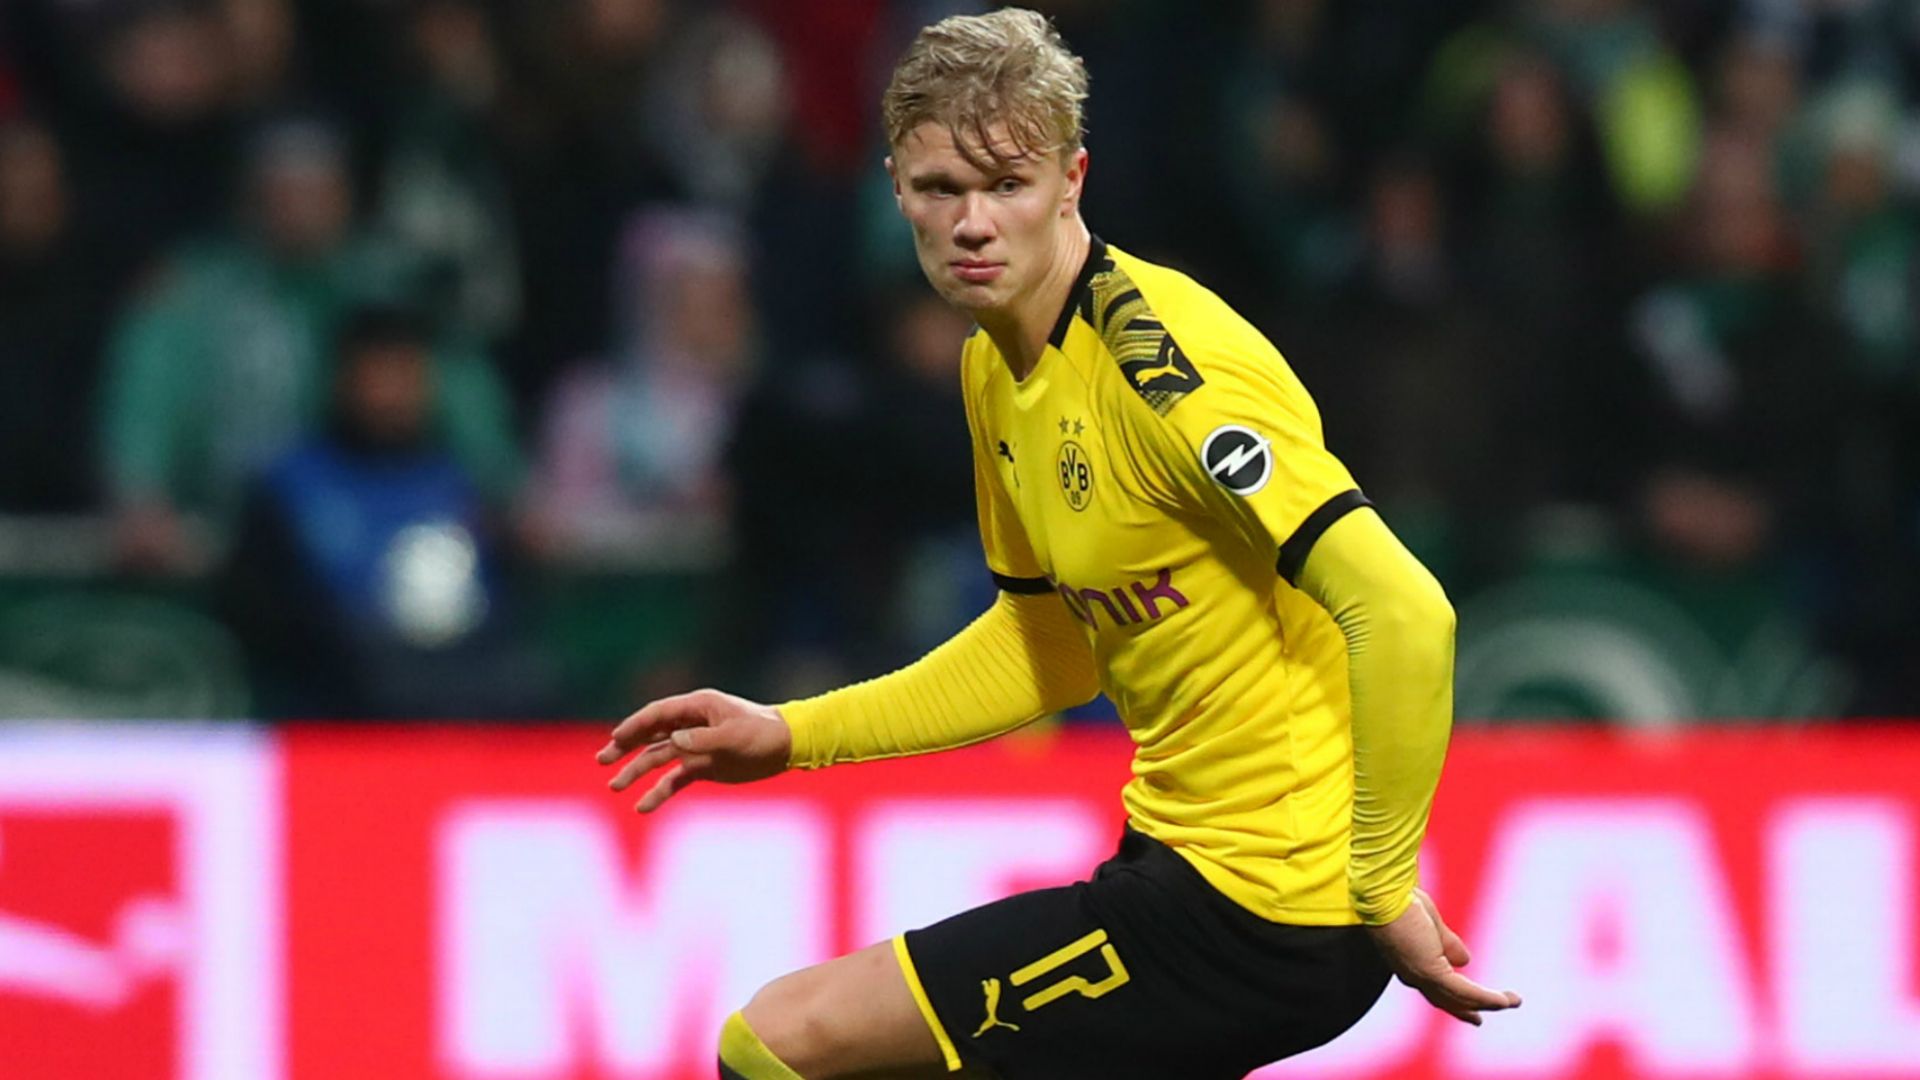 Rumour Has It: Real Madrid in talks with Dortmund over Haaland